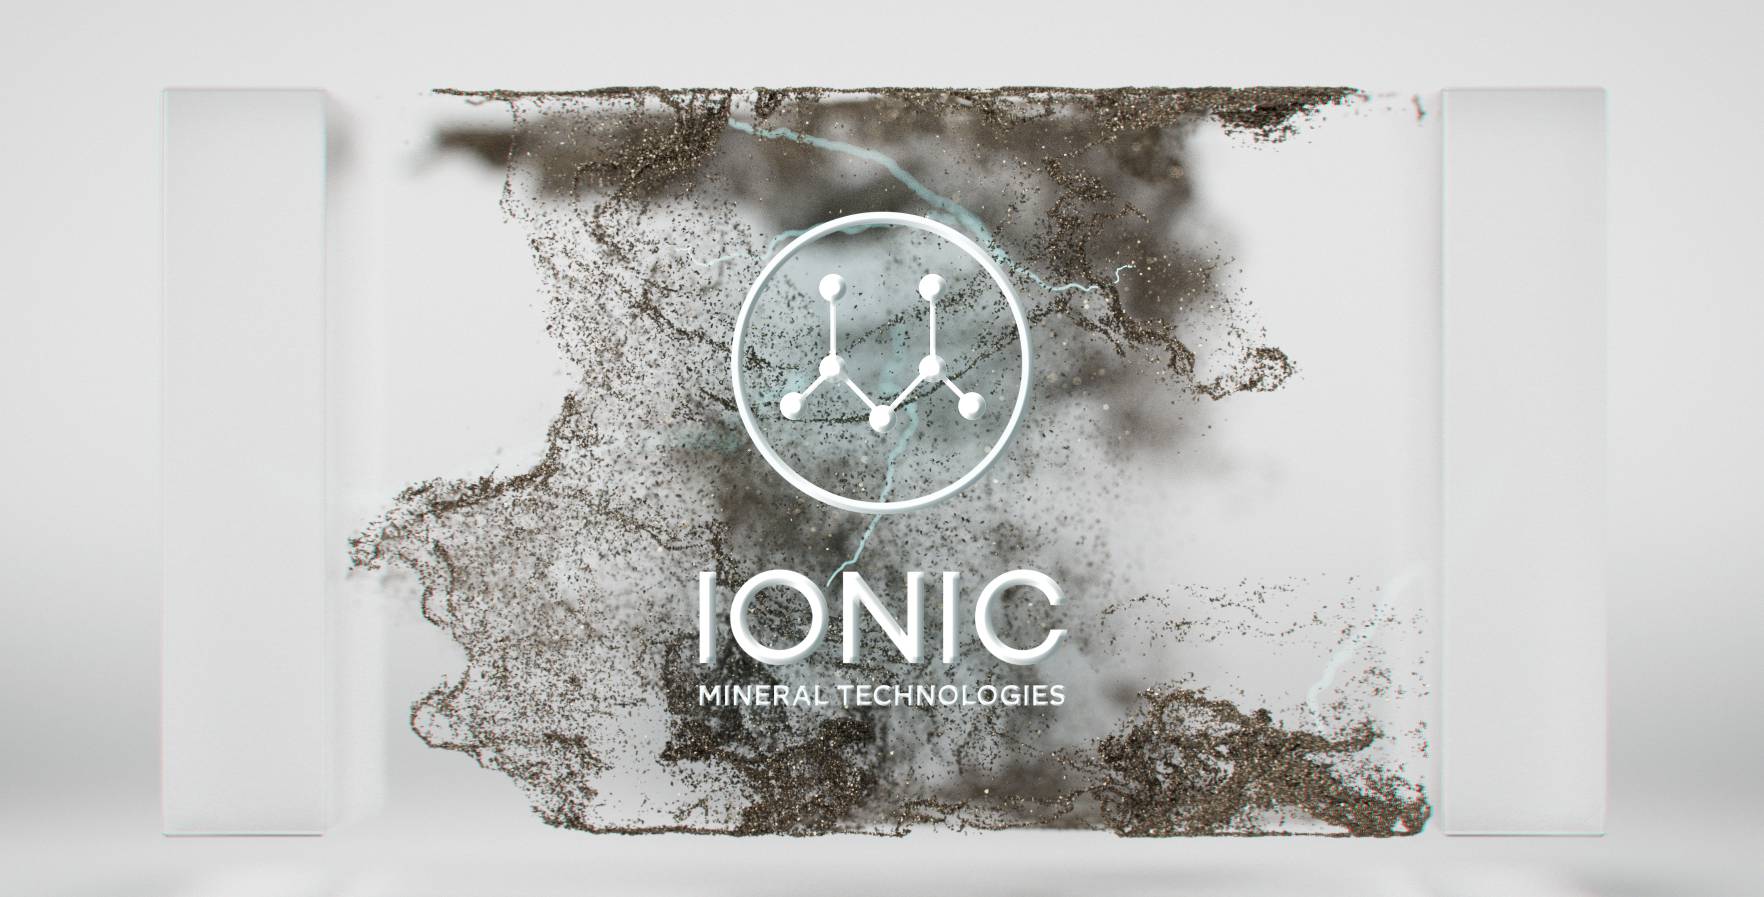 Ionic Mineral Technologies scaling-up Nano-Silicon supply for Electric Vehicle Batteries